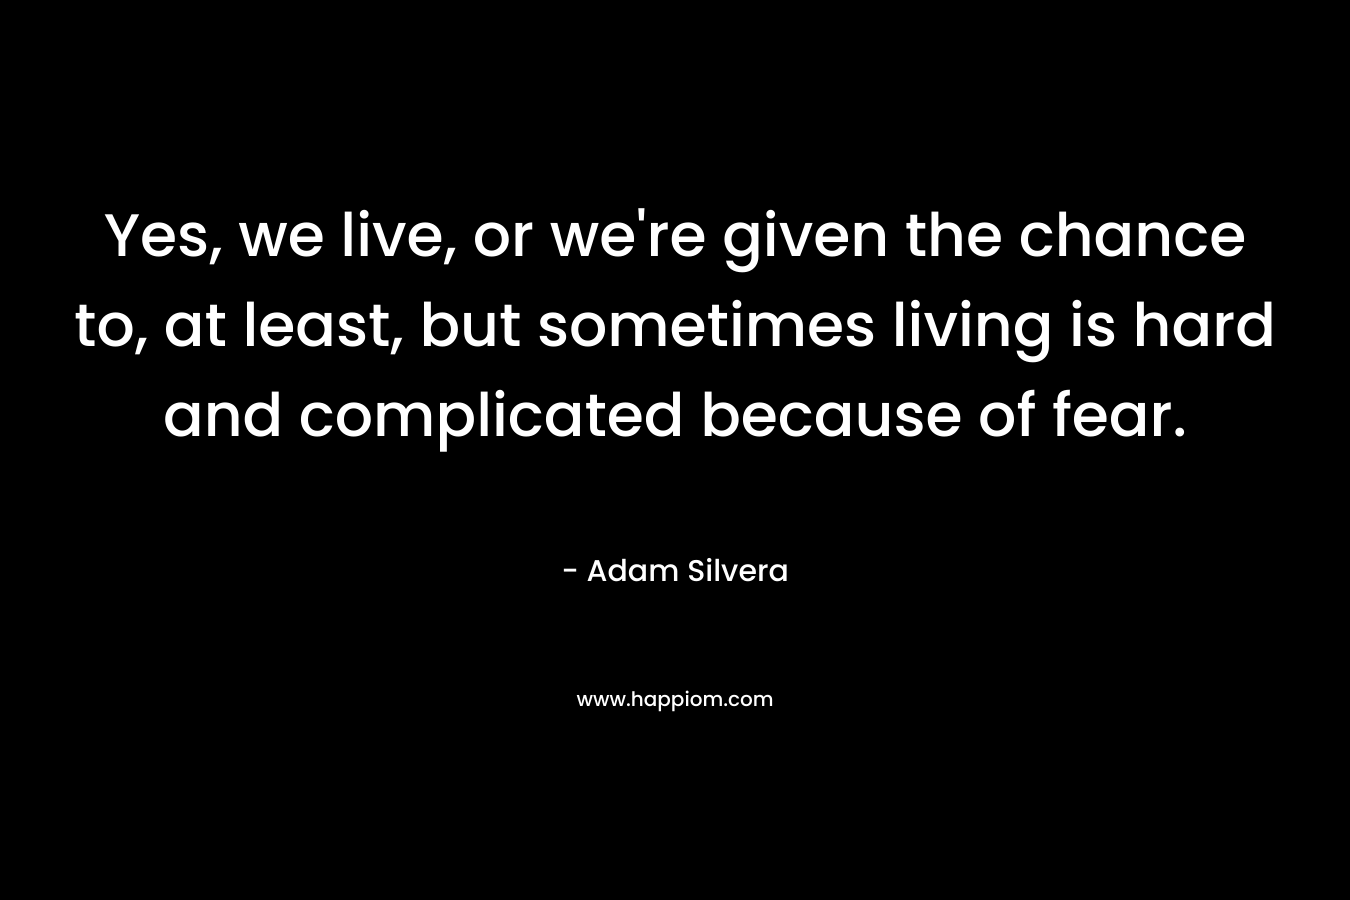 Yes, we live, or we're given the chance to, at least, but sometimes living is hard and complicated because of fear.